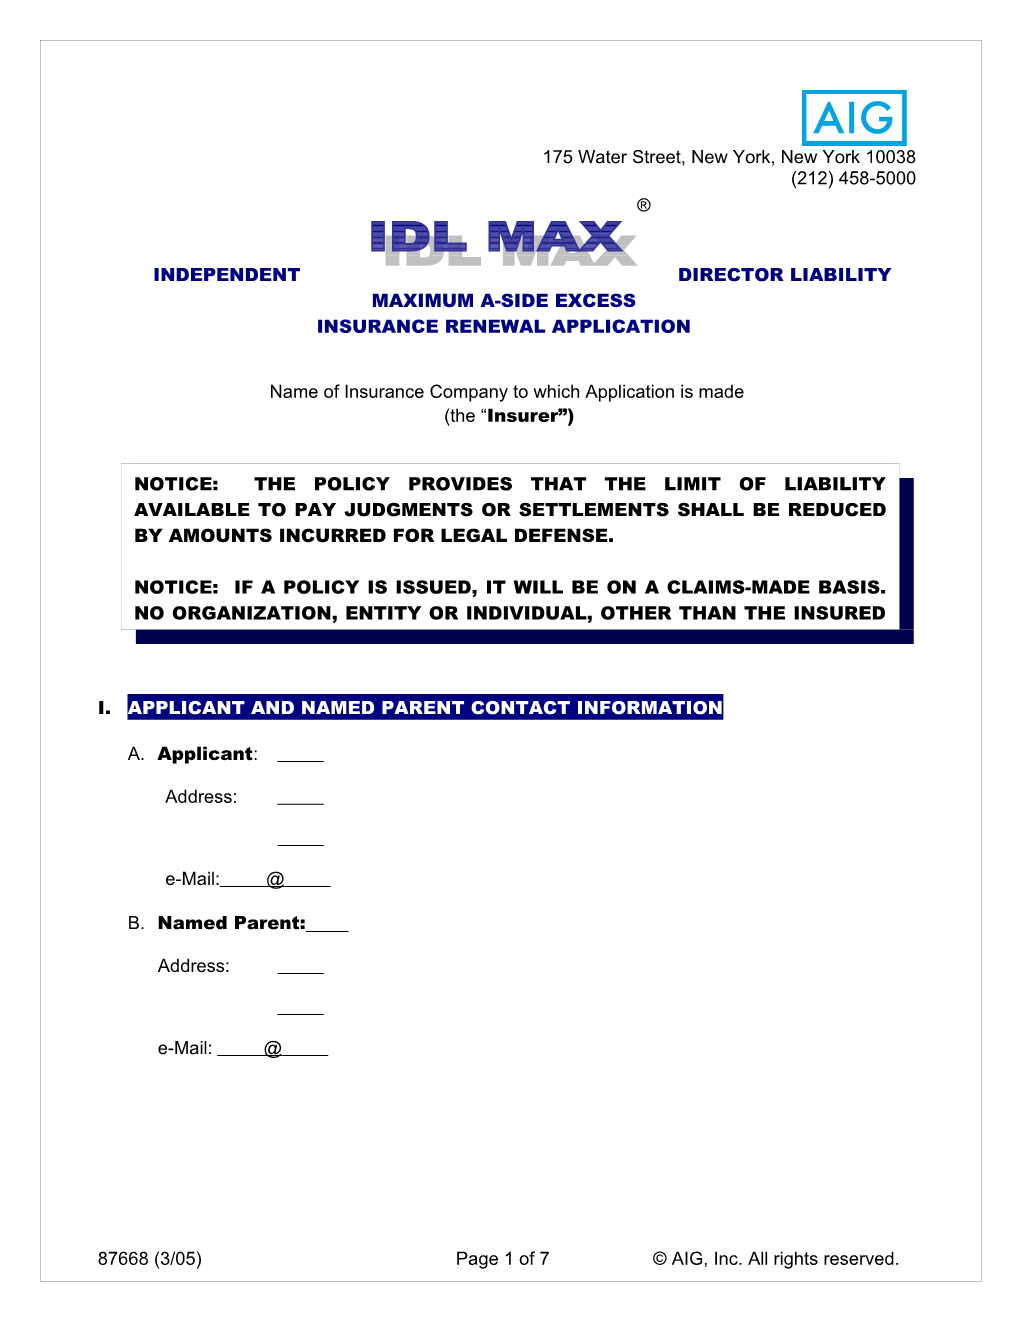 Independent Director Liability Maximum A-Side Excess